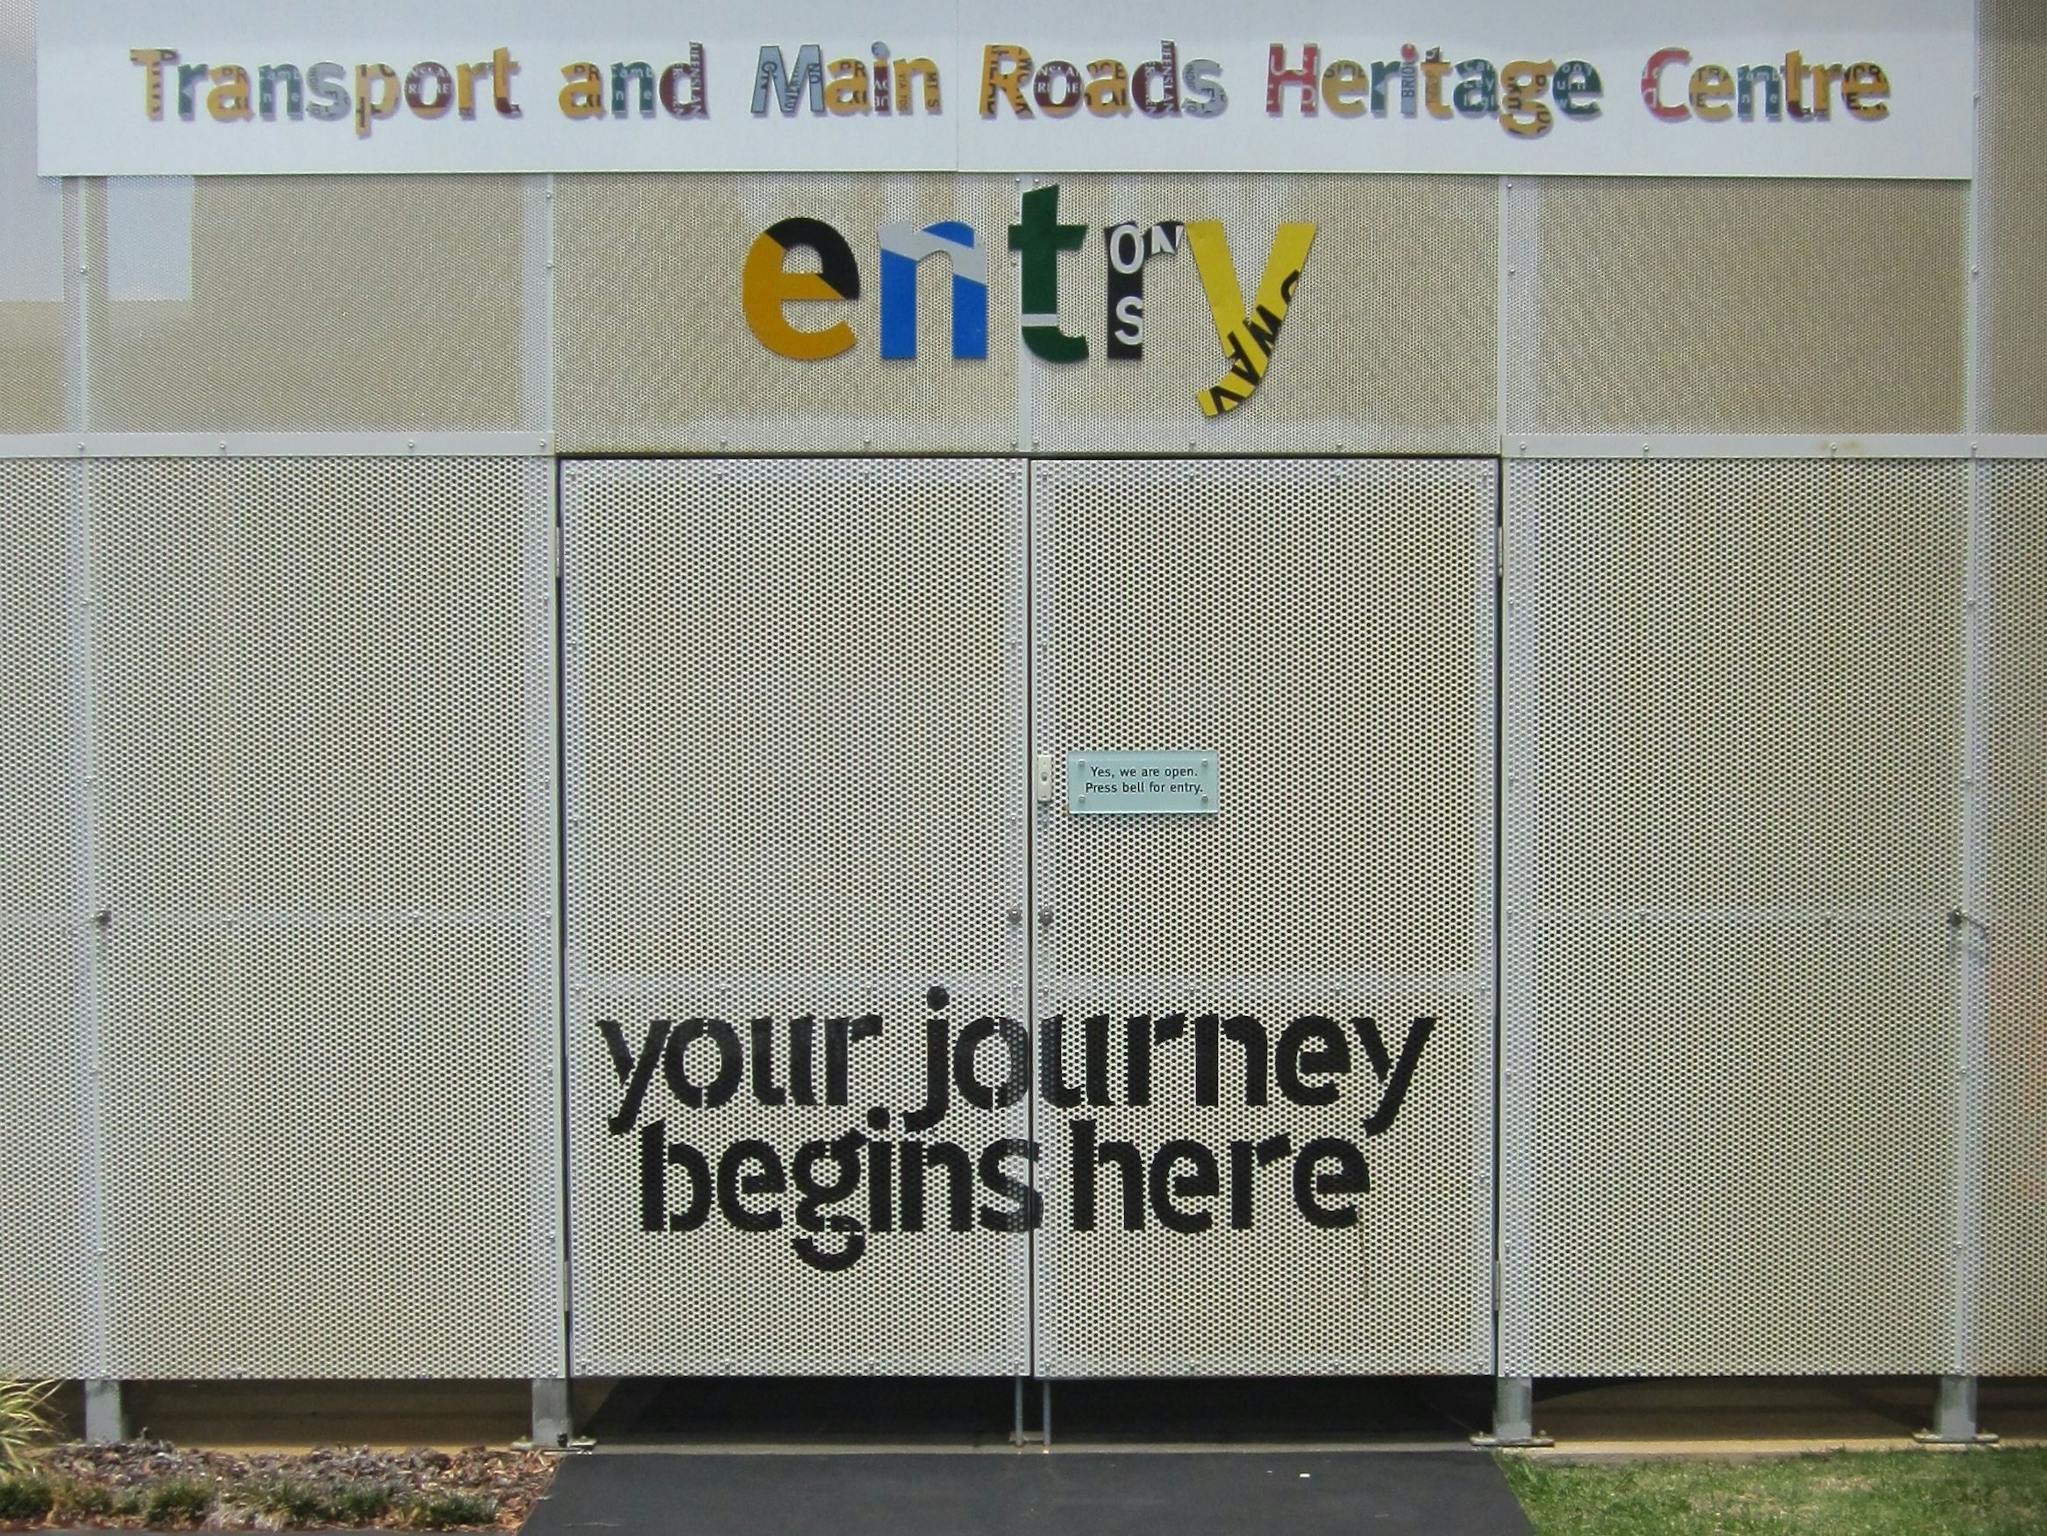 Entry to the Transport and Main Roads Heritage Centre.